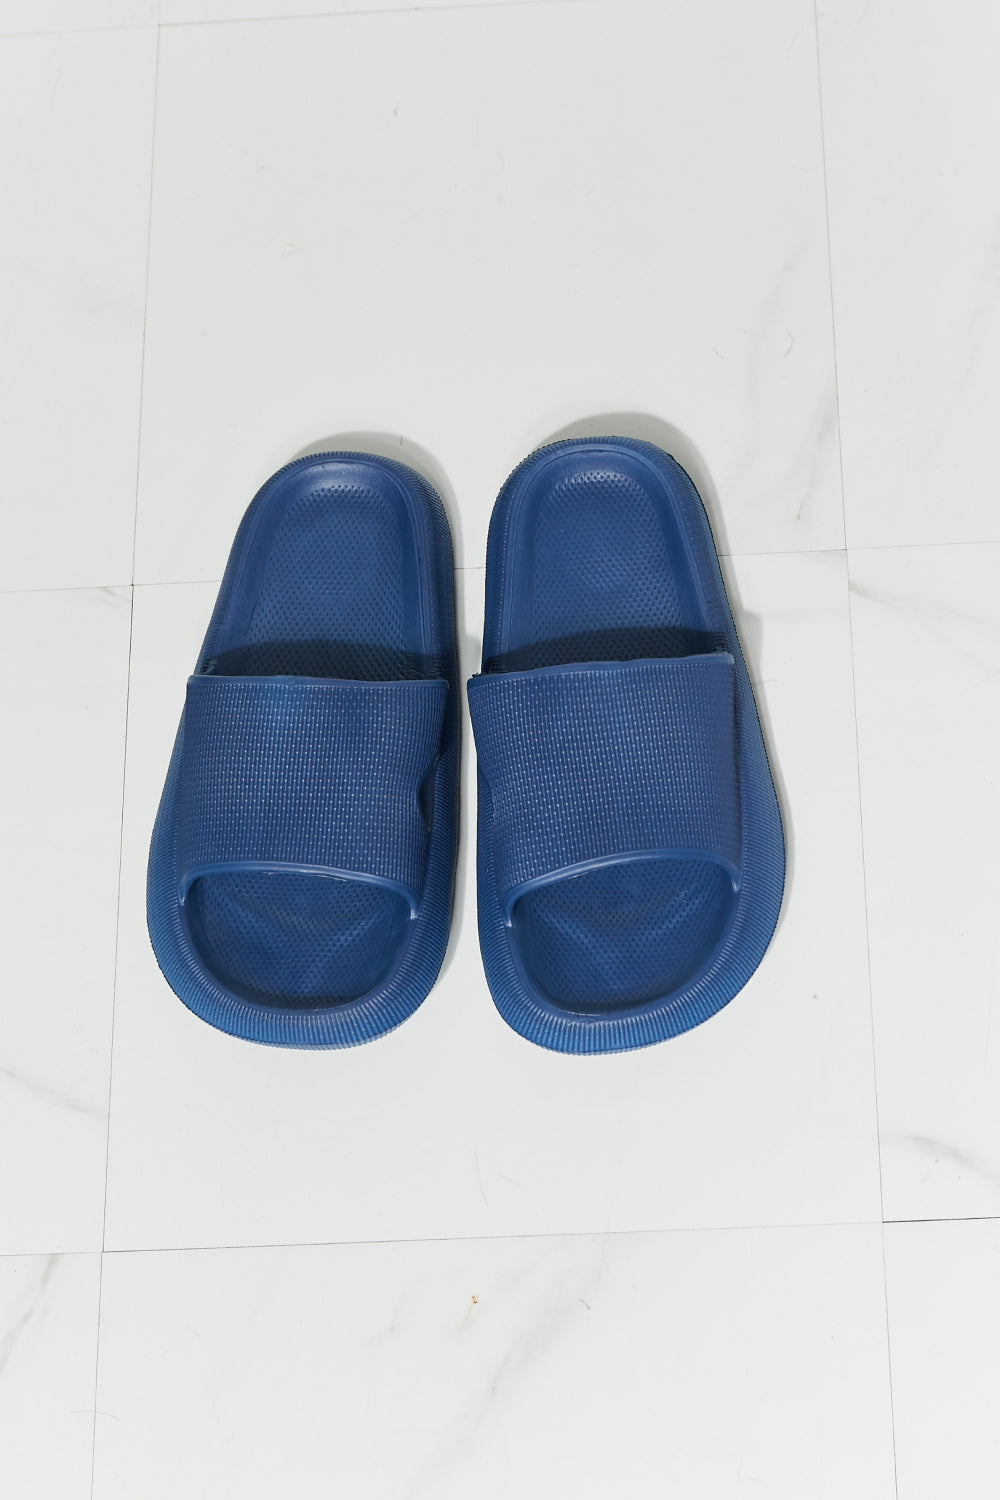 MMShoes Arms Around Me Open Toe Slide in Navy MMShoes